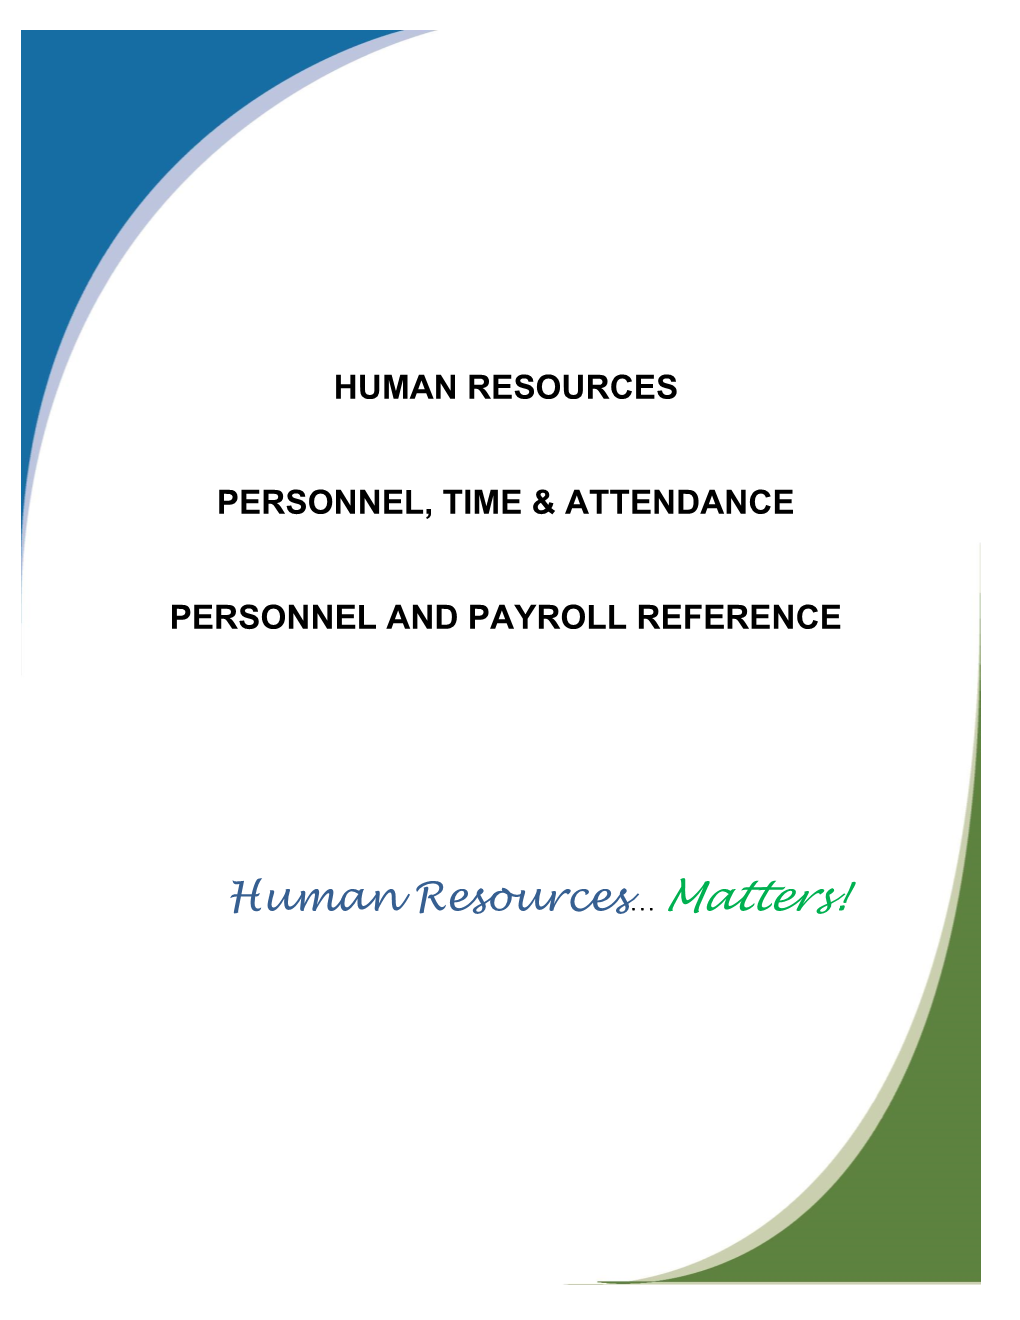 Personnel and Payroll Reference